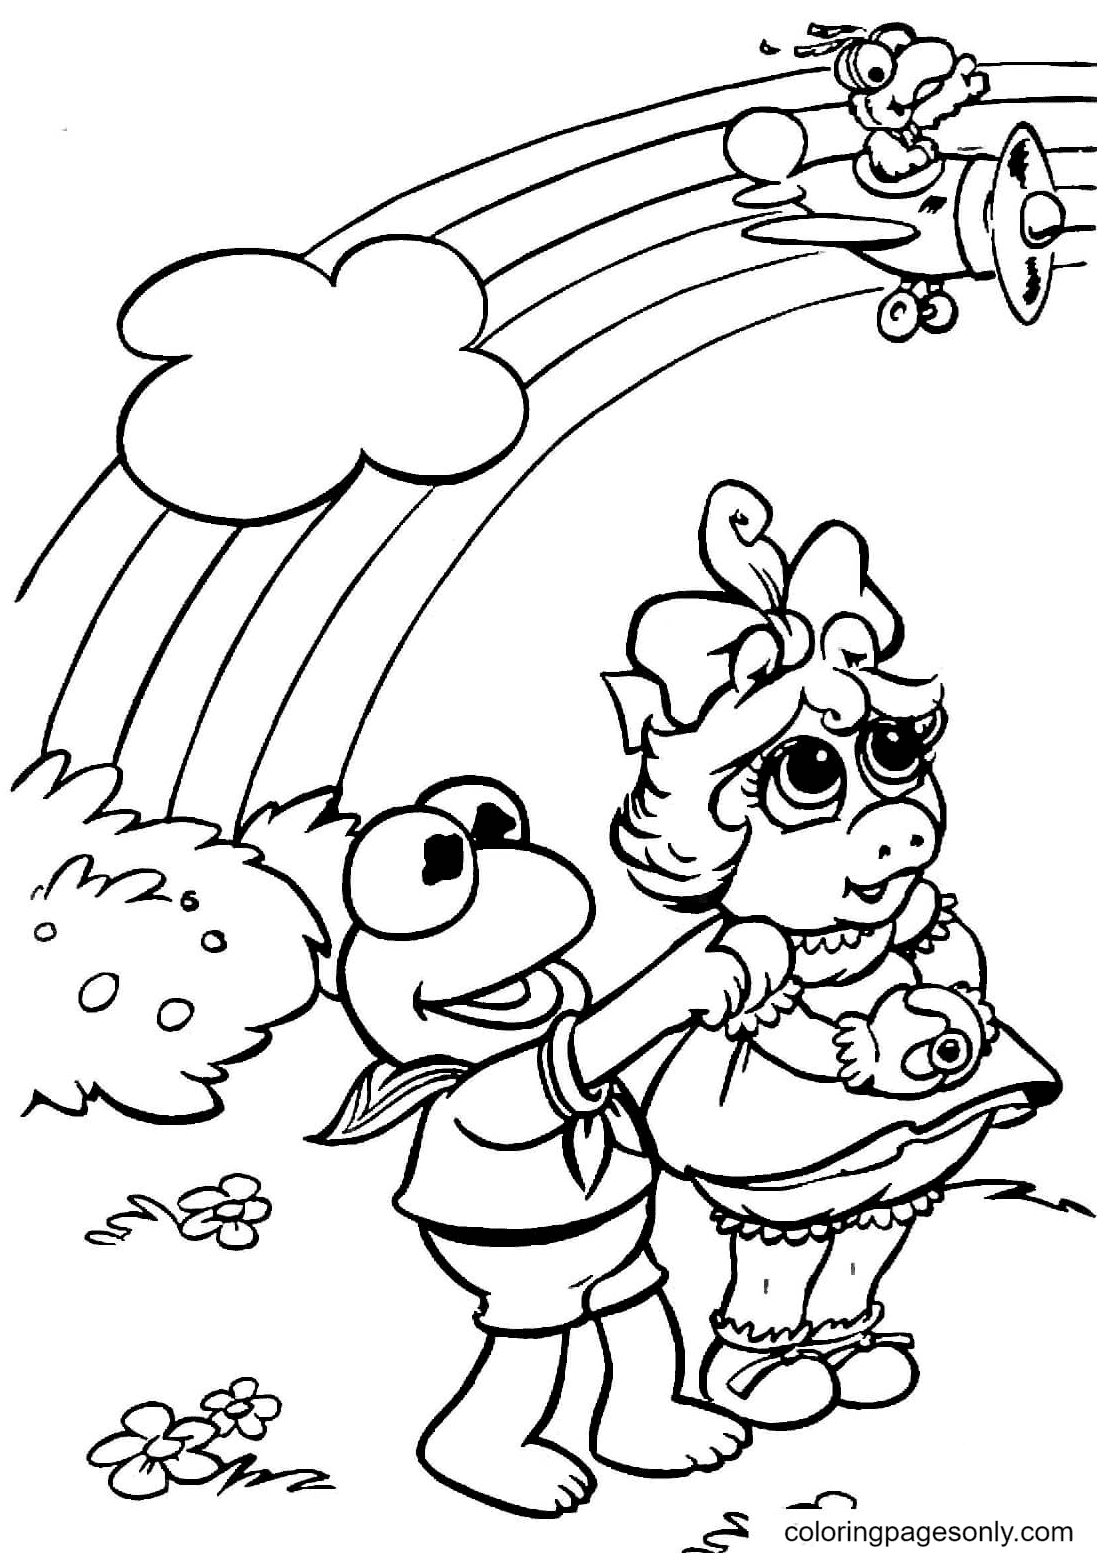 Kermit, Miss Piggy and Gonzo Coloring Pages